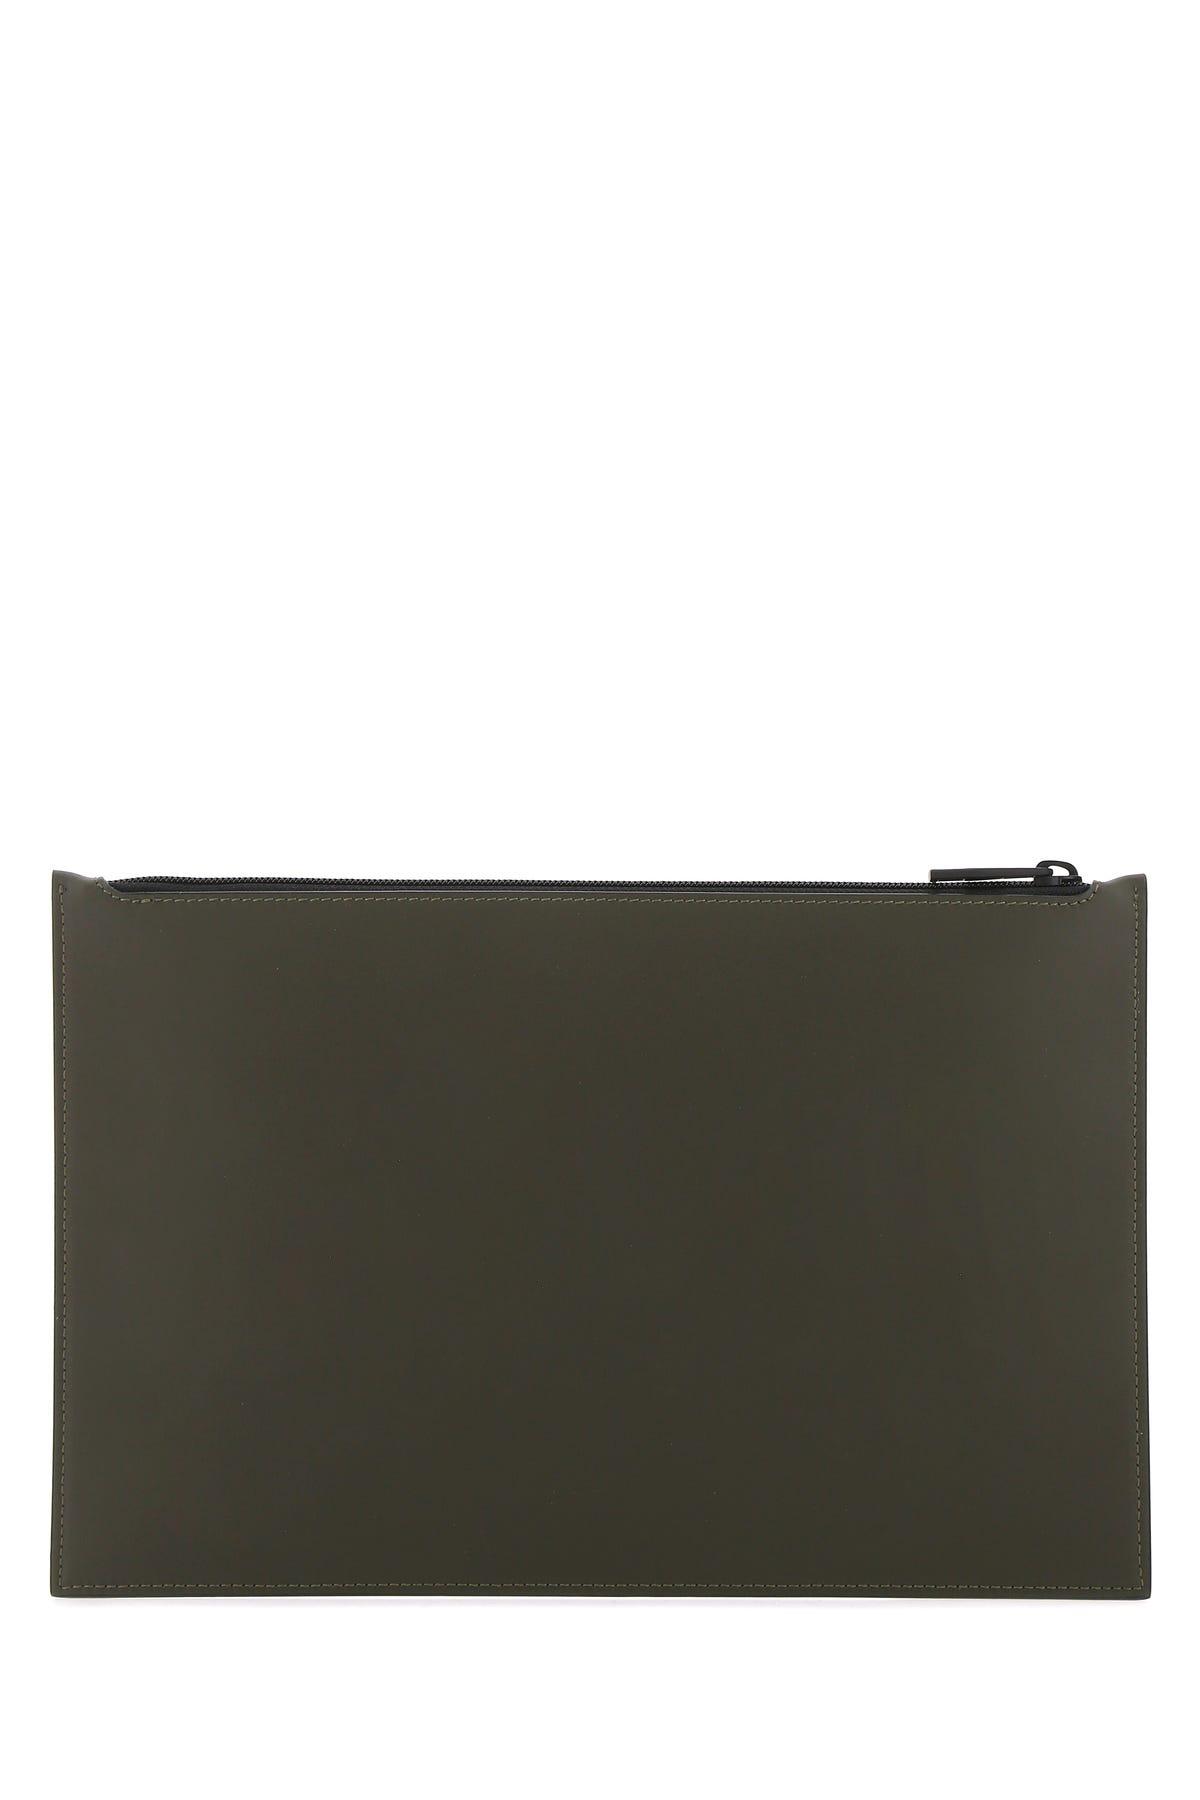 Alexander McQueen Army Green Leather Clutch for Men - Save 48% | Lyst